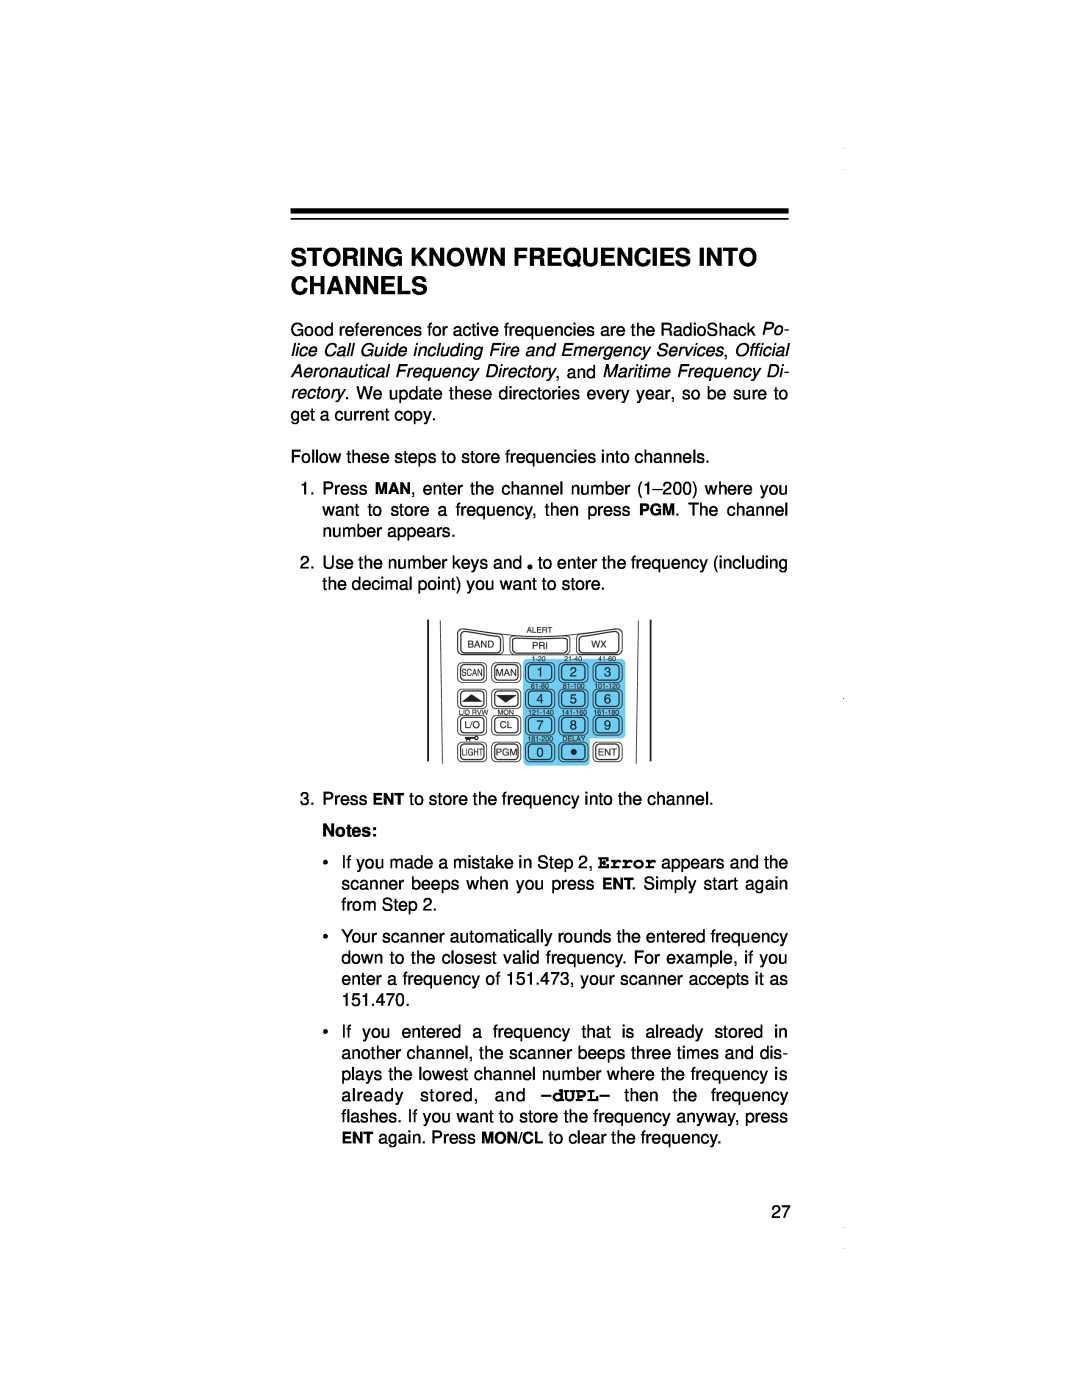 Radio Shack PRO-79 owner manual Storing Known Frequencies Into Channels 